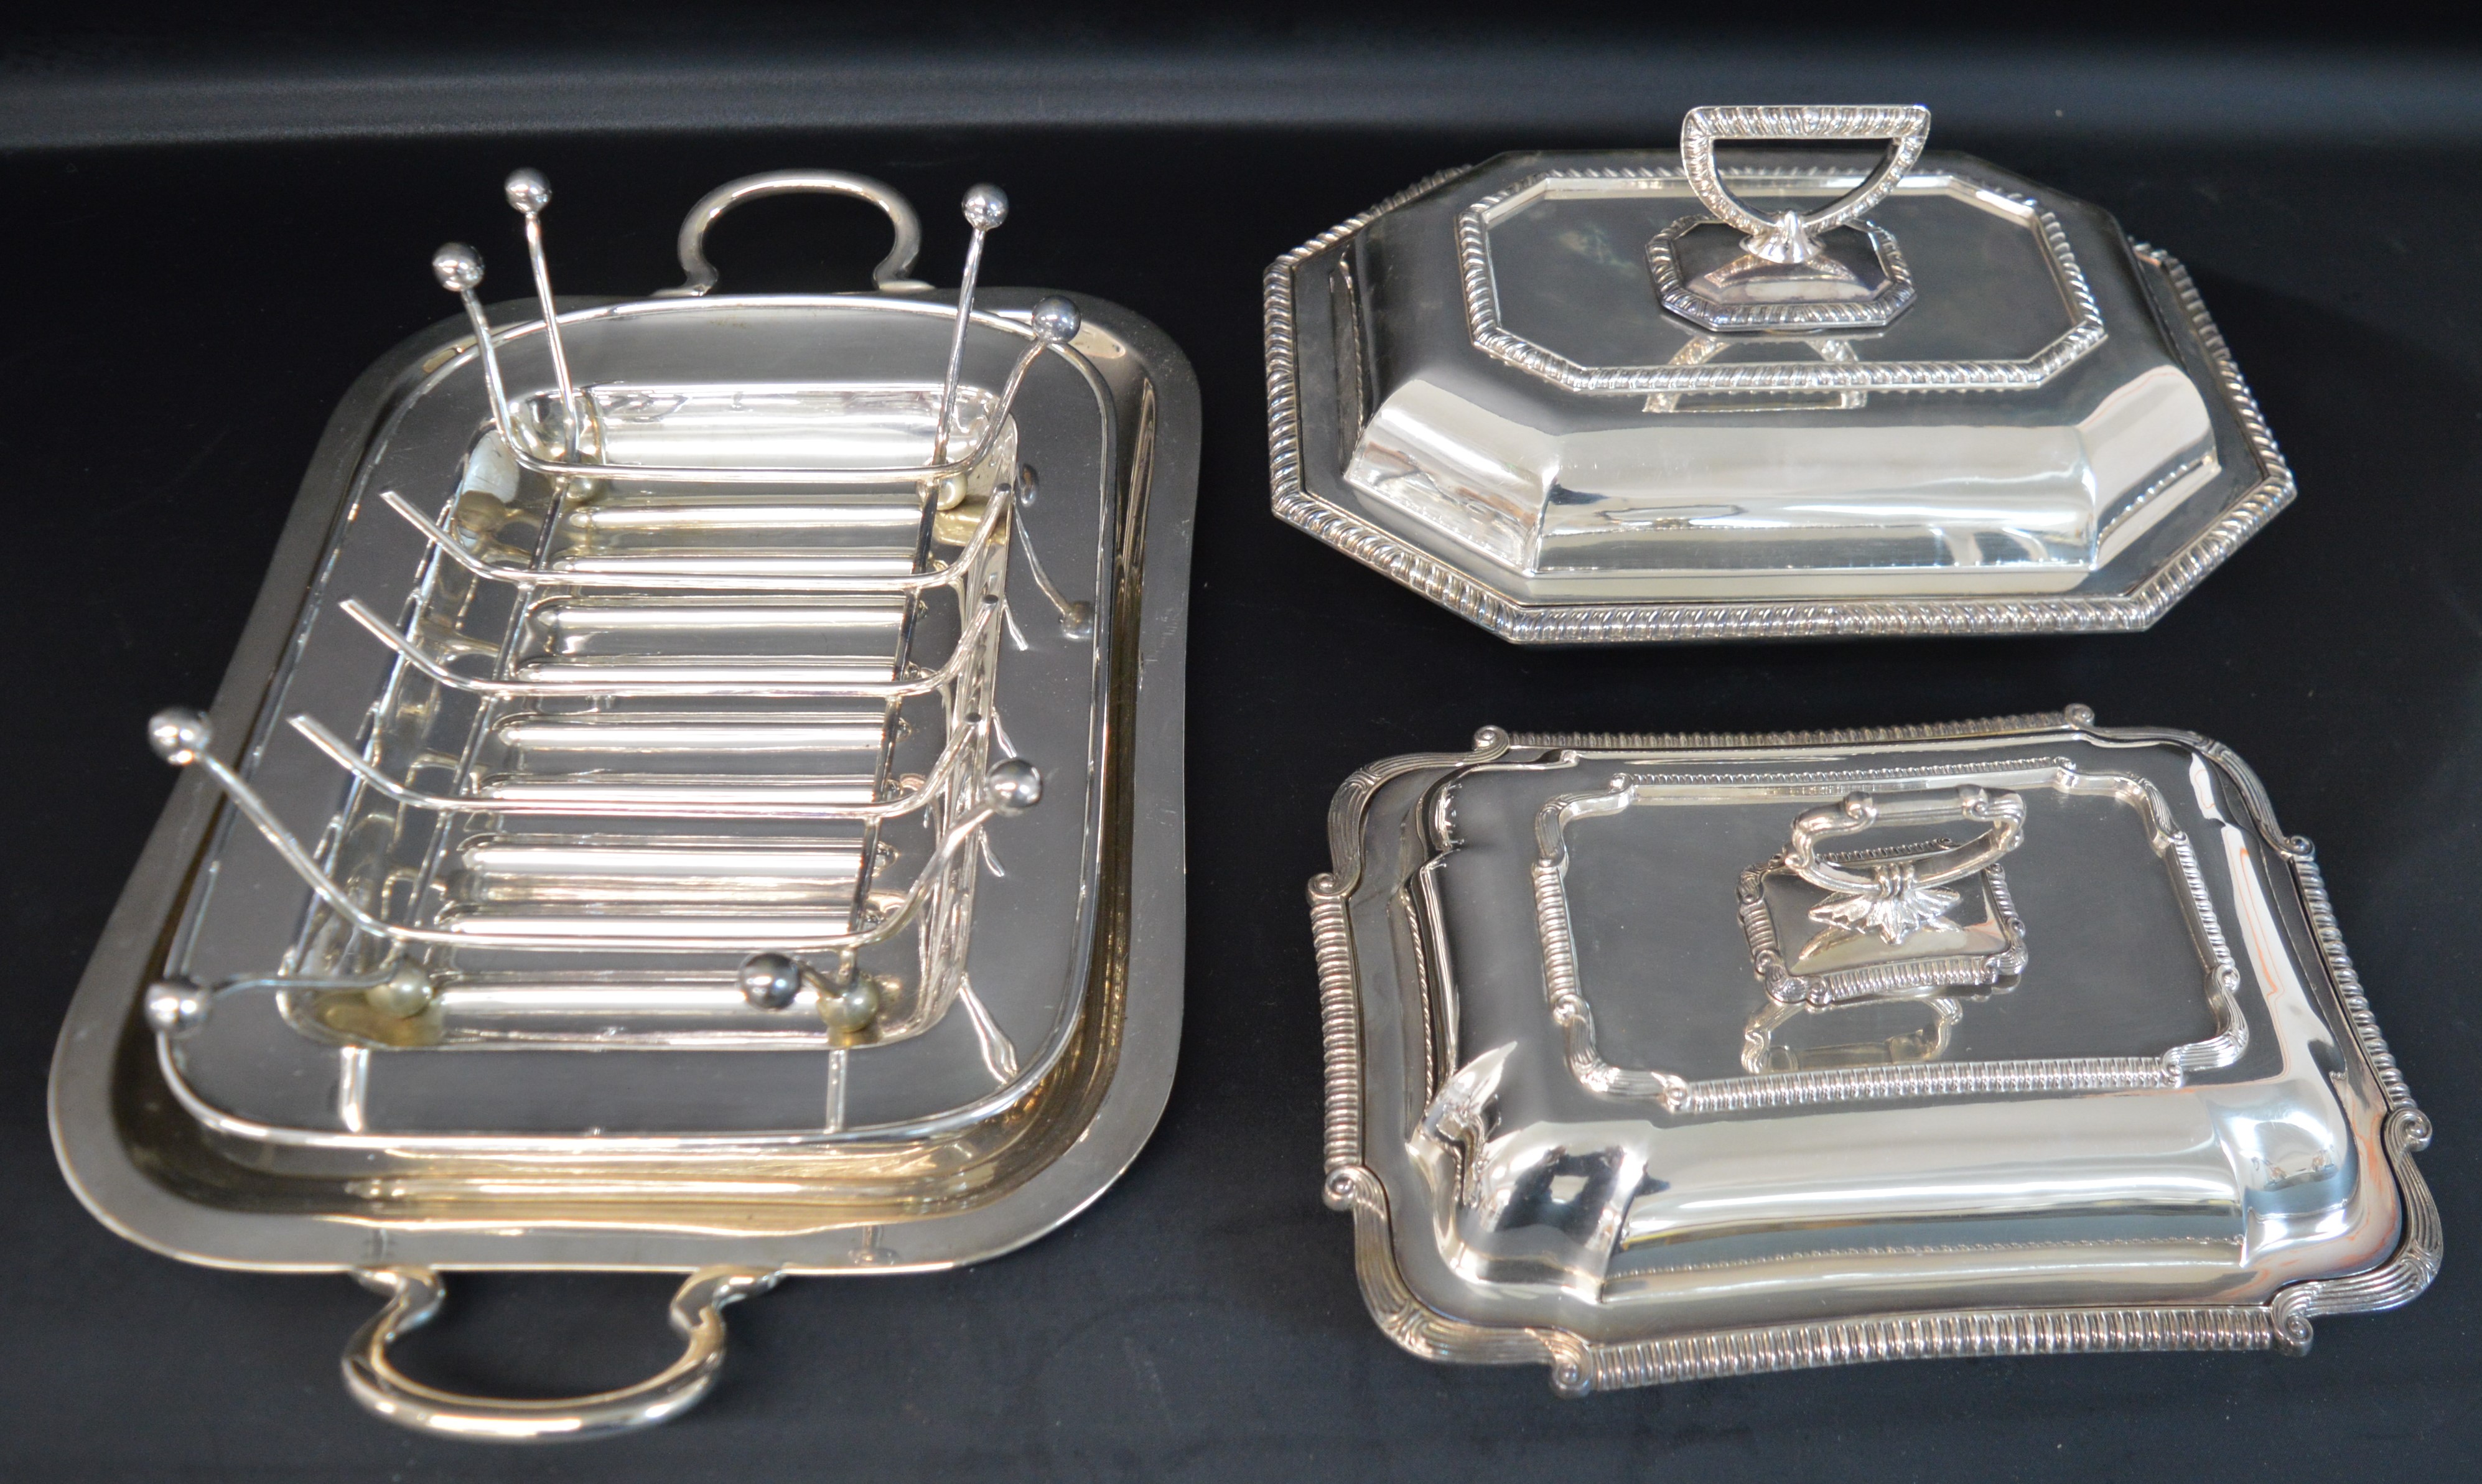 Two antique silver plated entrée dishes (1 x Mappin & Webb), joint of meat carving stand & twin